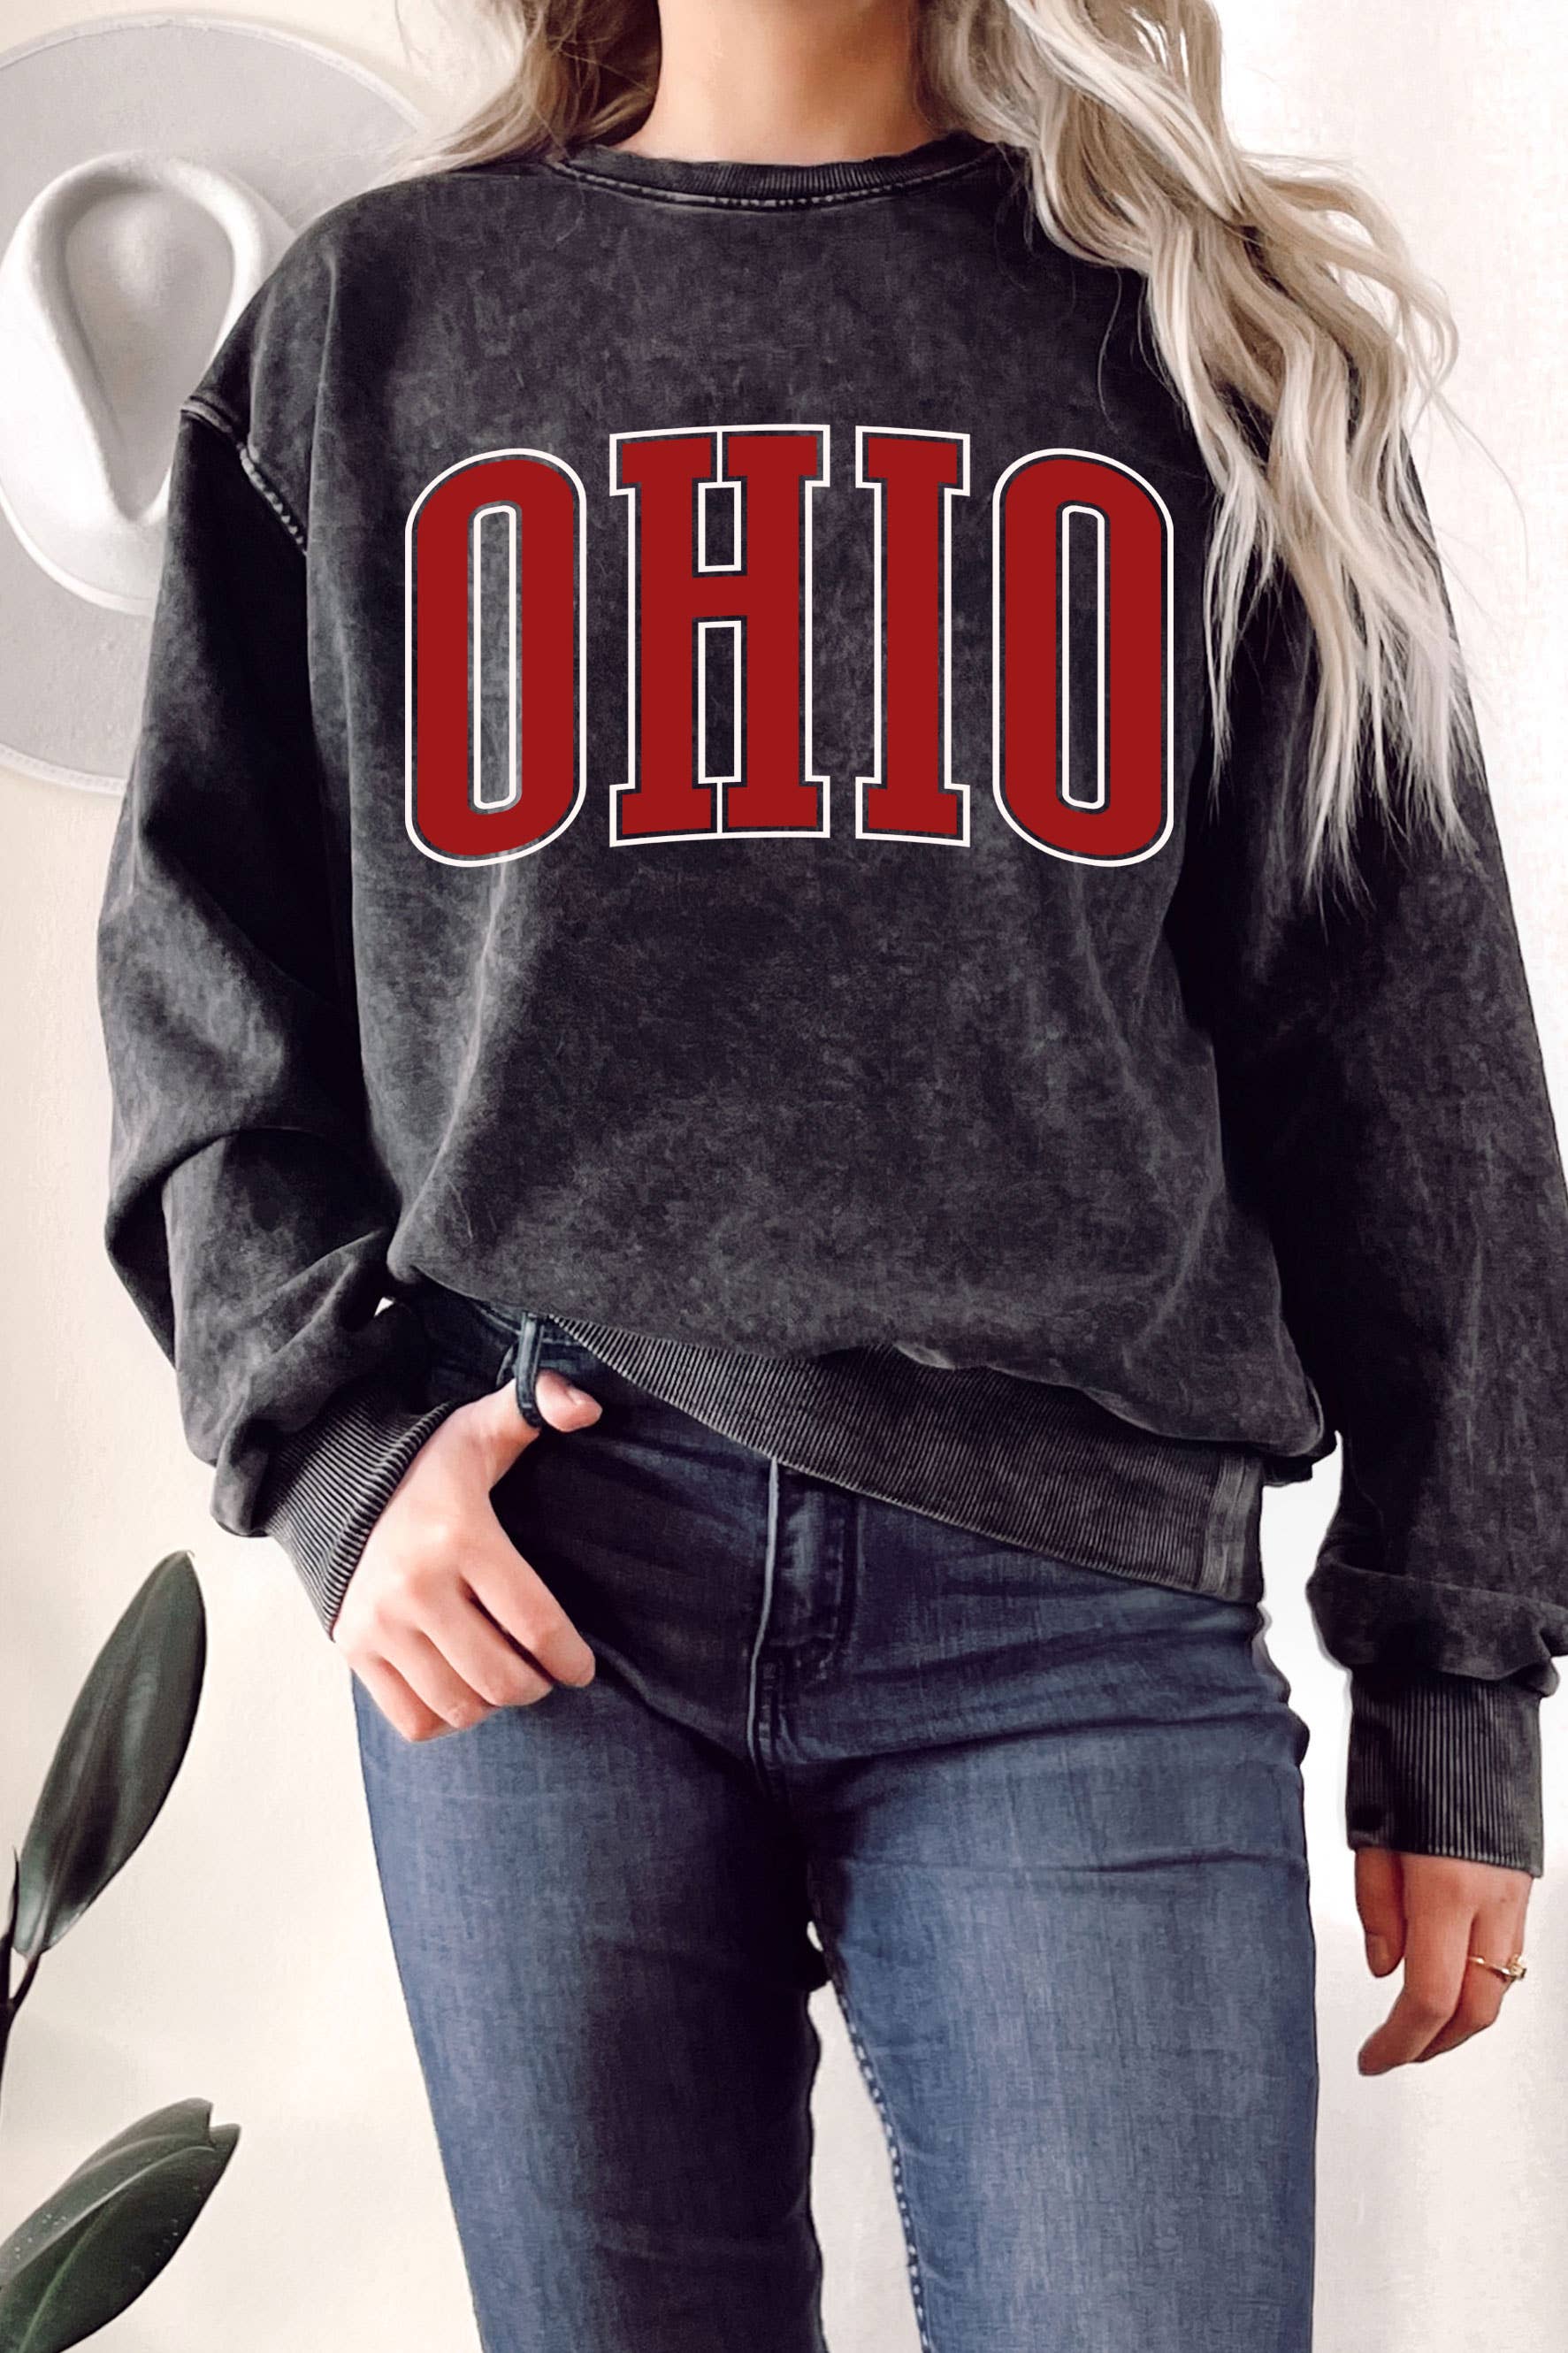 OHIO PUFF MINERAL GRAPHIC TERRY SWEATSHIRT: BLACK - Storm and Sky Shoppe - Rustee Clothing